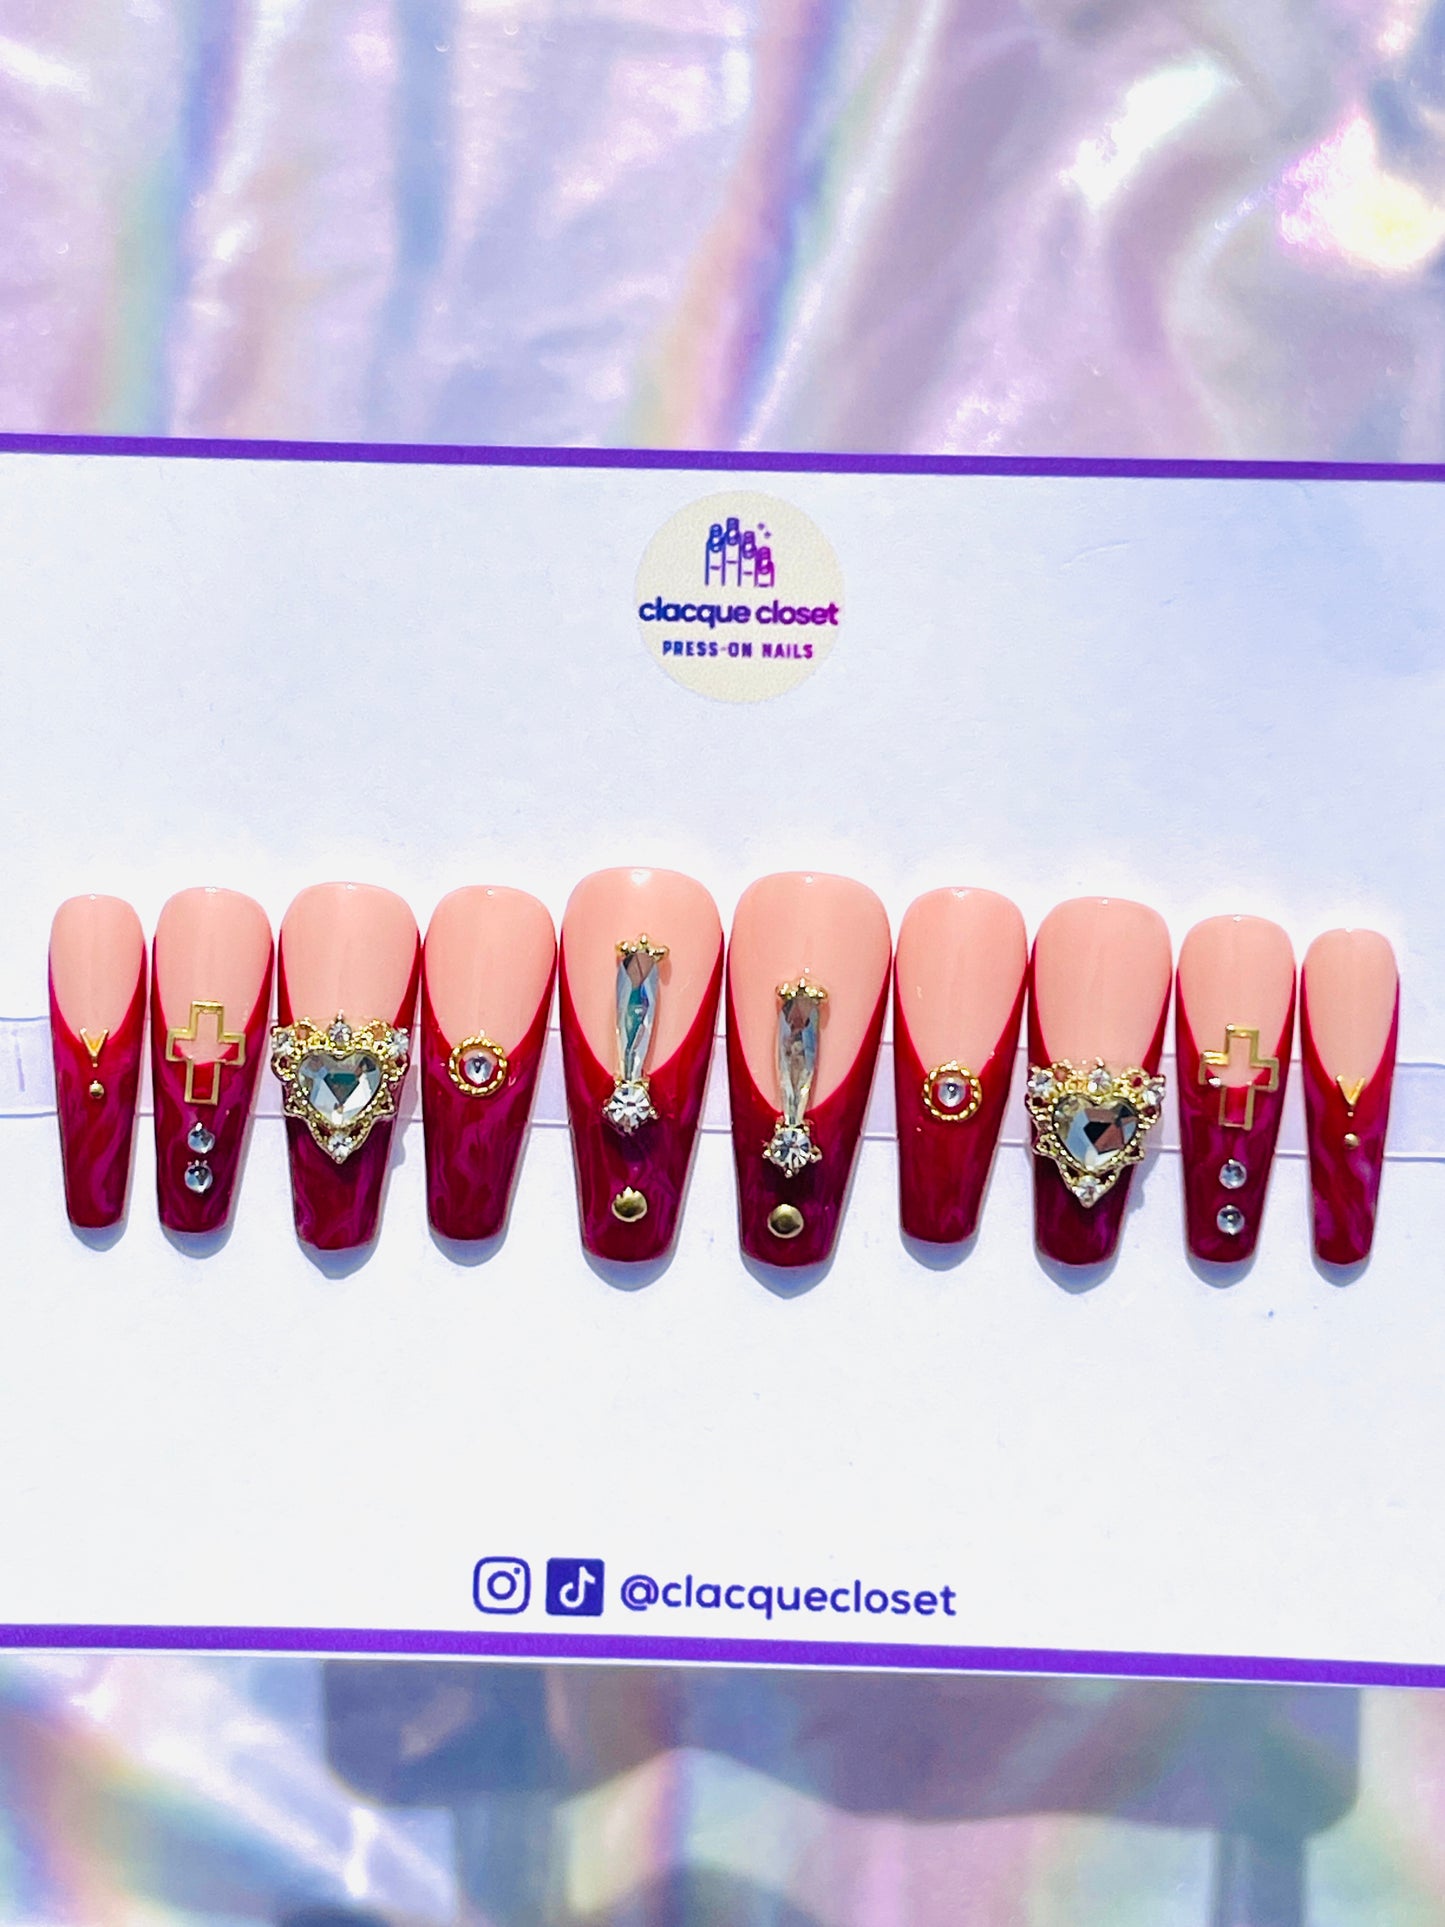 Long coffin-shaped nails with a red marble effect and classic French tips, enhanced with bold rhinestone embellishments and gold accents for a dramatic and luxurious appearance.